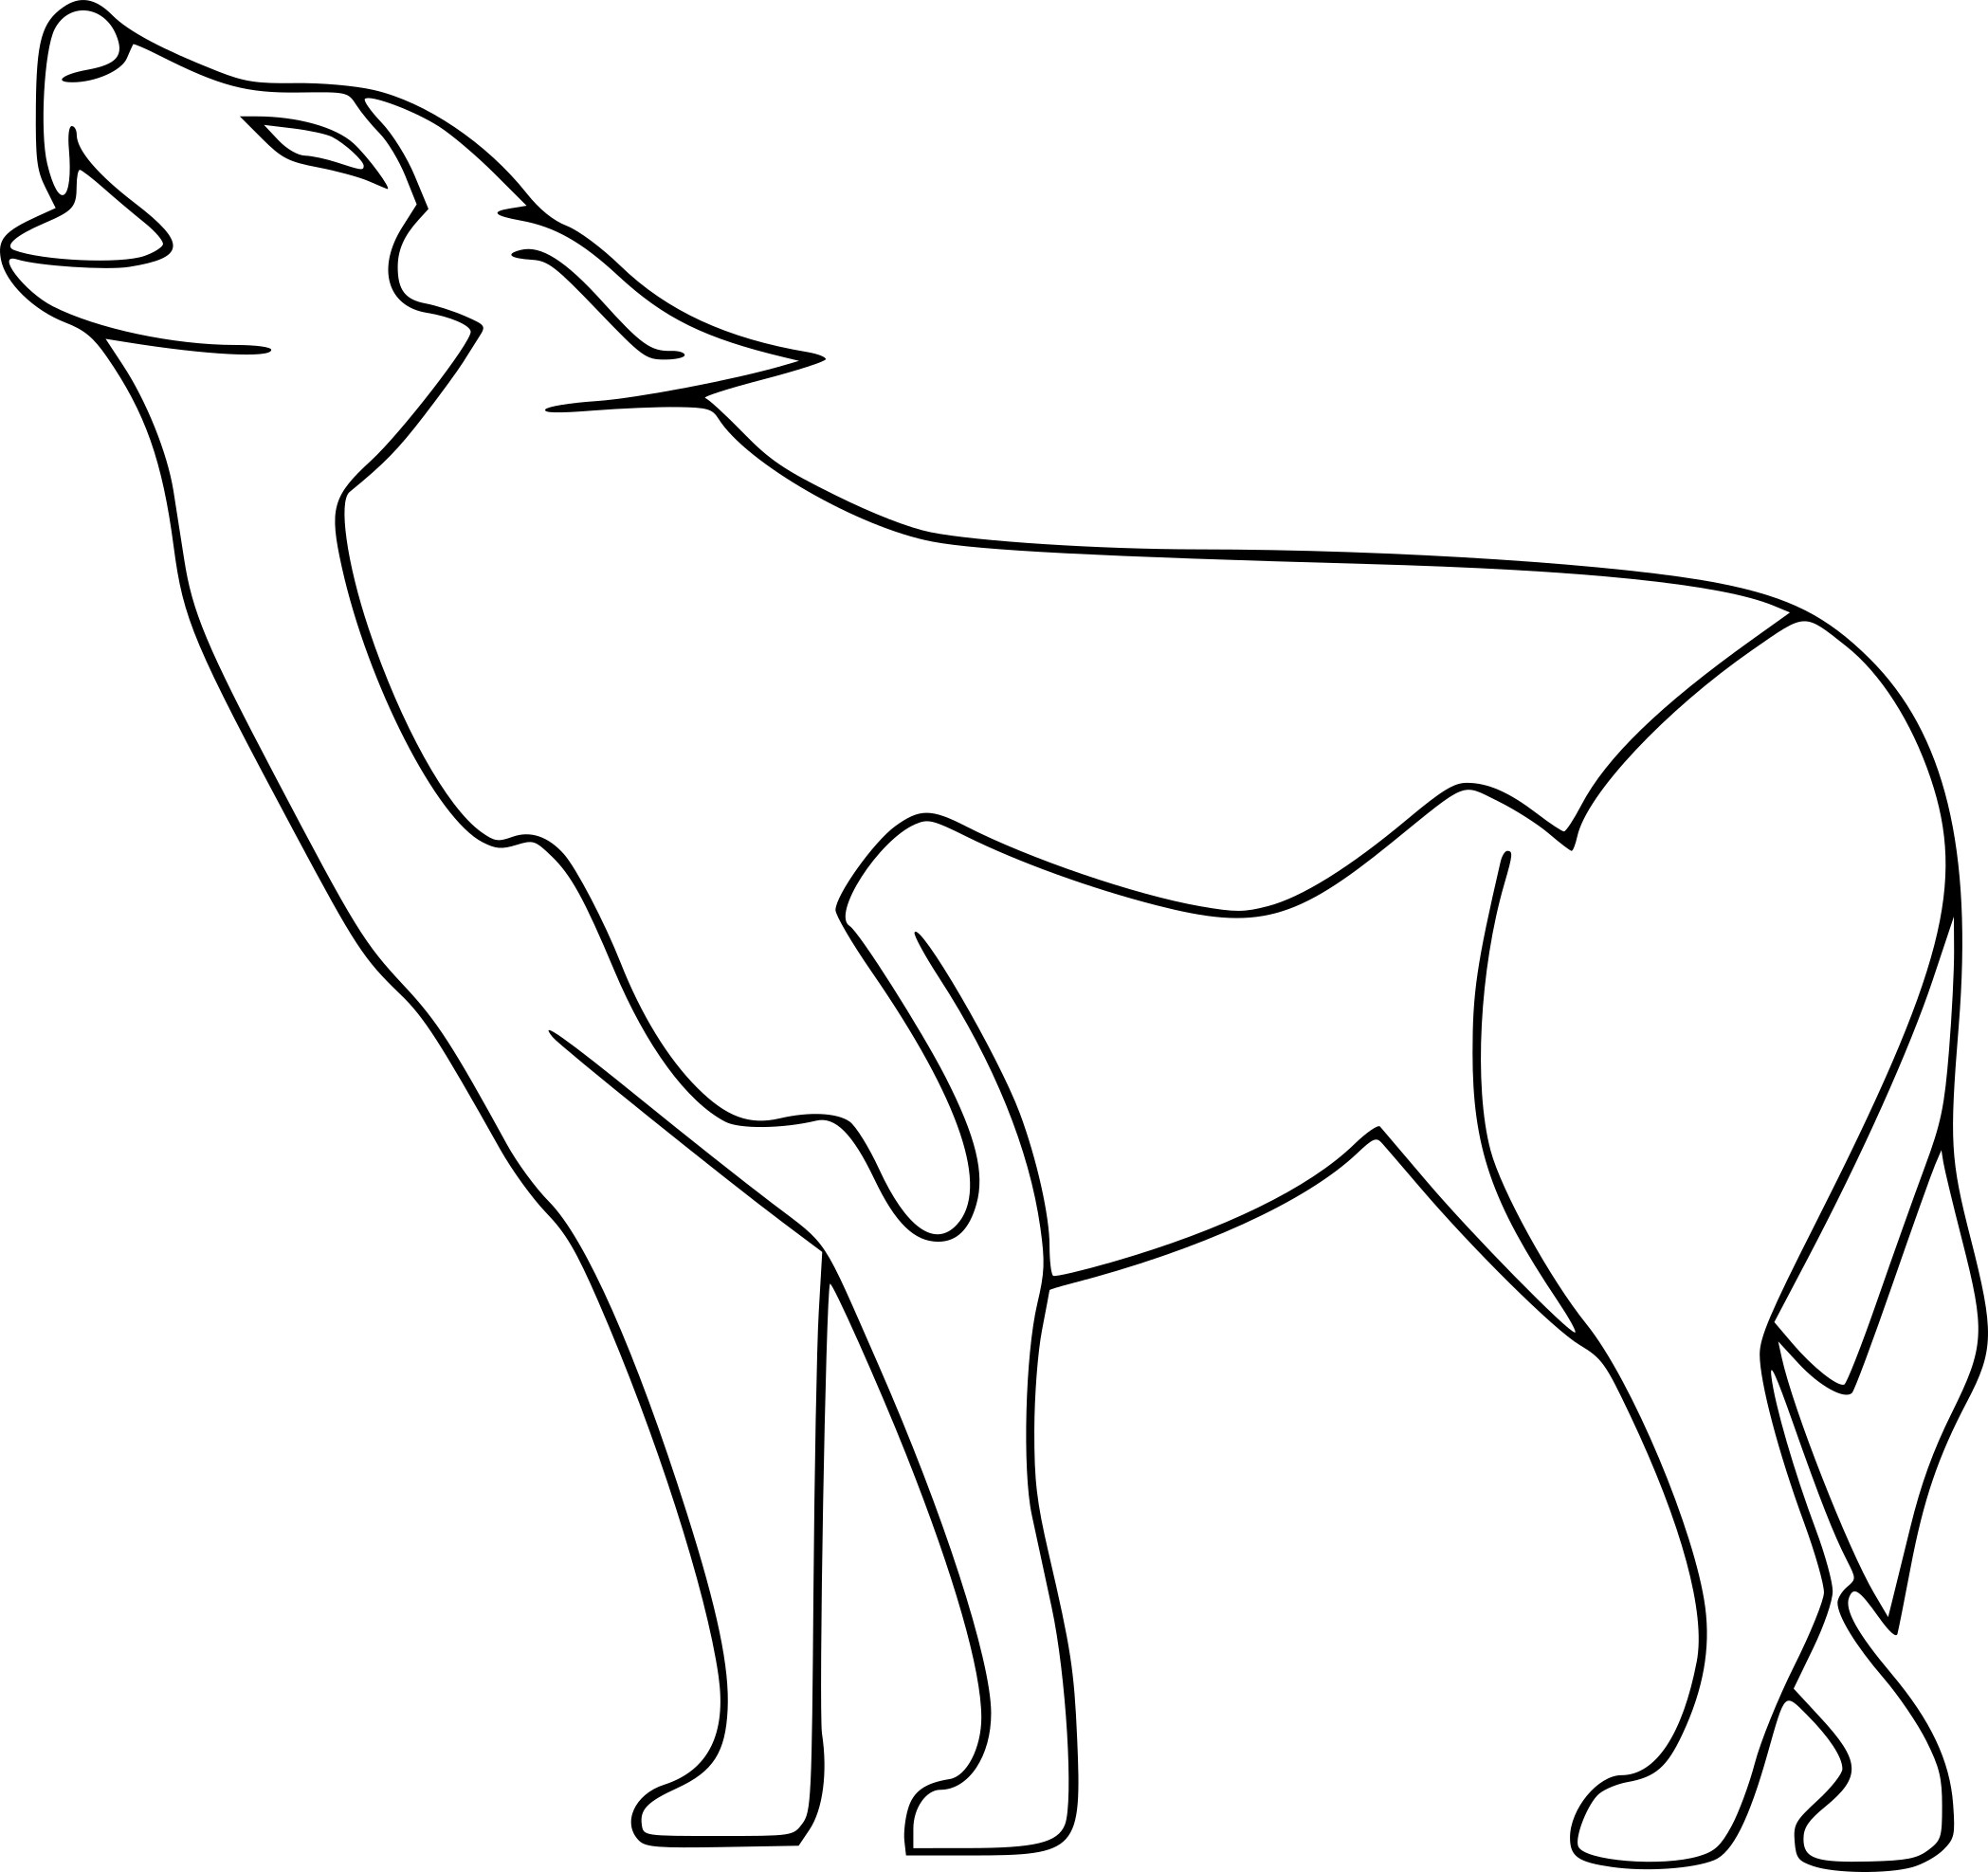 Coloriagegullifrcoloriages Animauxloups Loup Dessin Loup | Images and ...